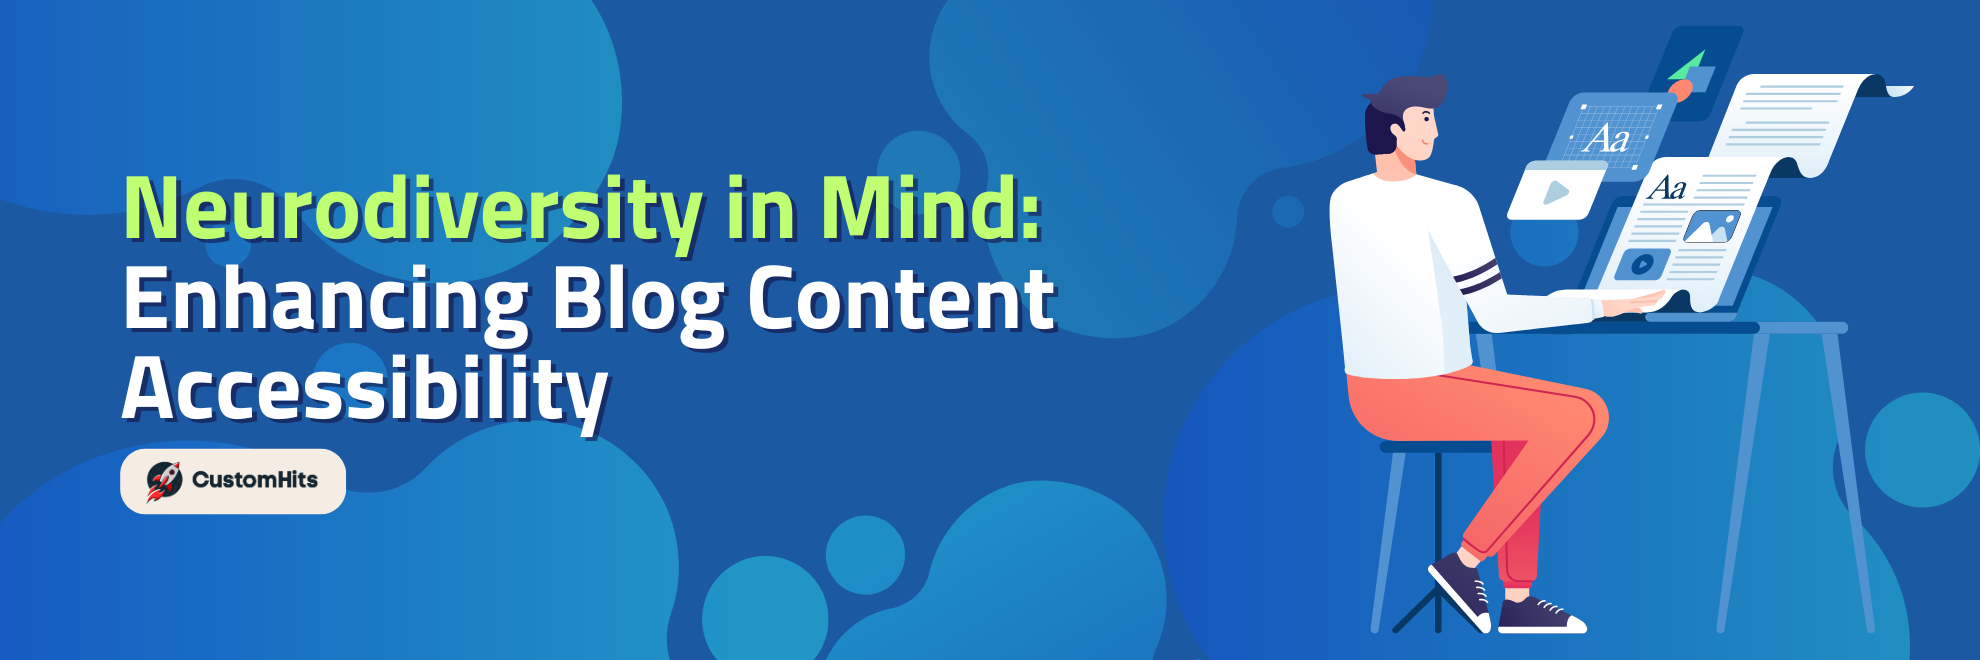 Neurodiversity in Mind: Enhancing Blog Content Accessibility